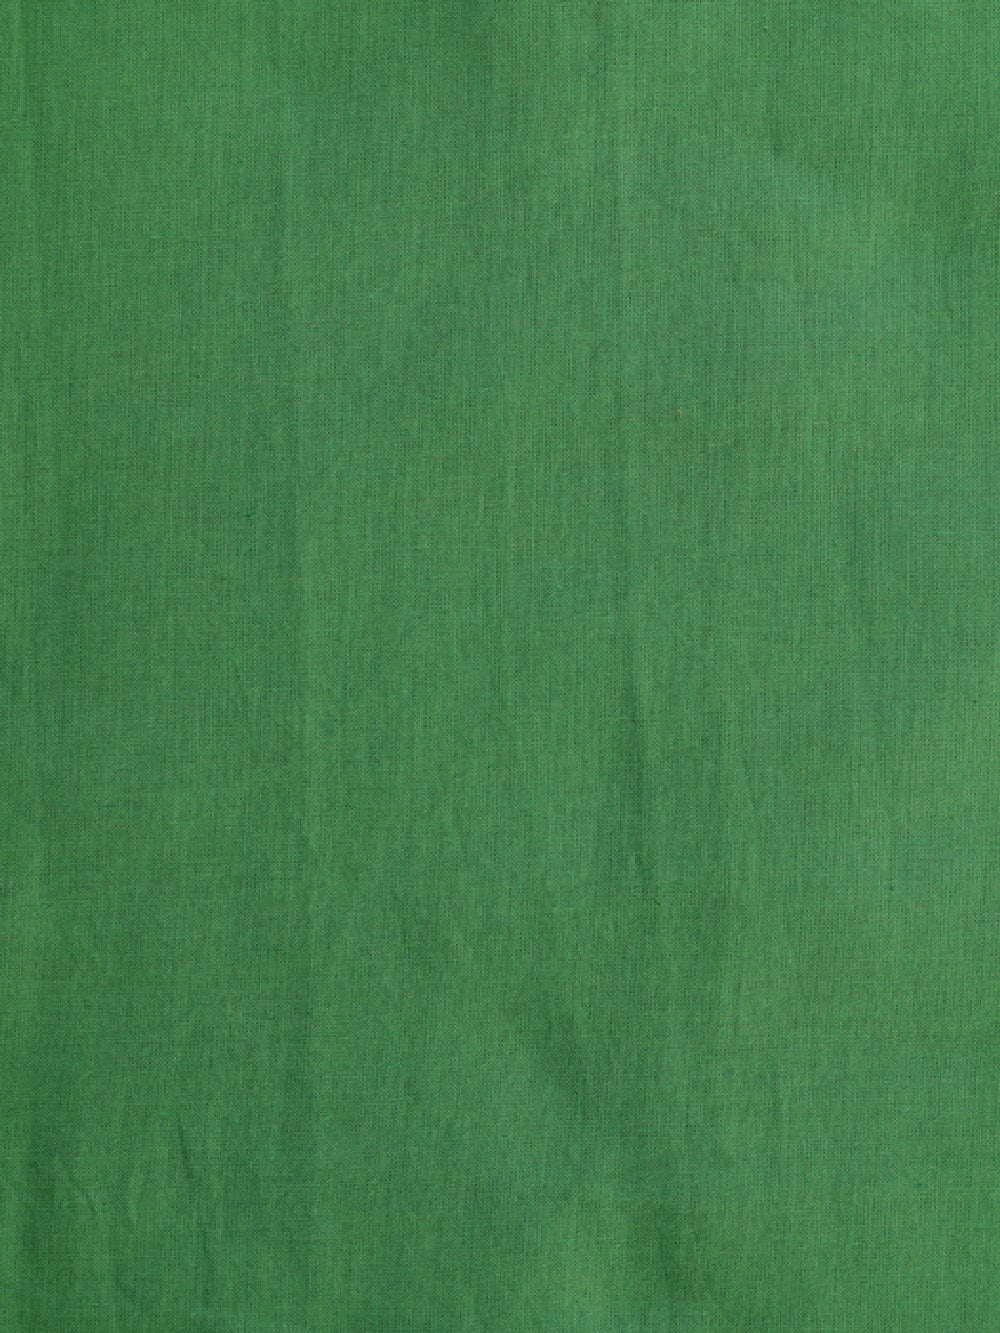 C-9 Green Shade Solid Dyed Cotton Cambric Fabric